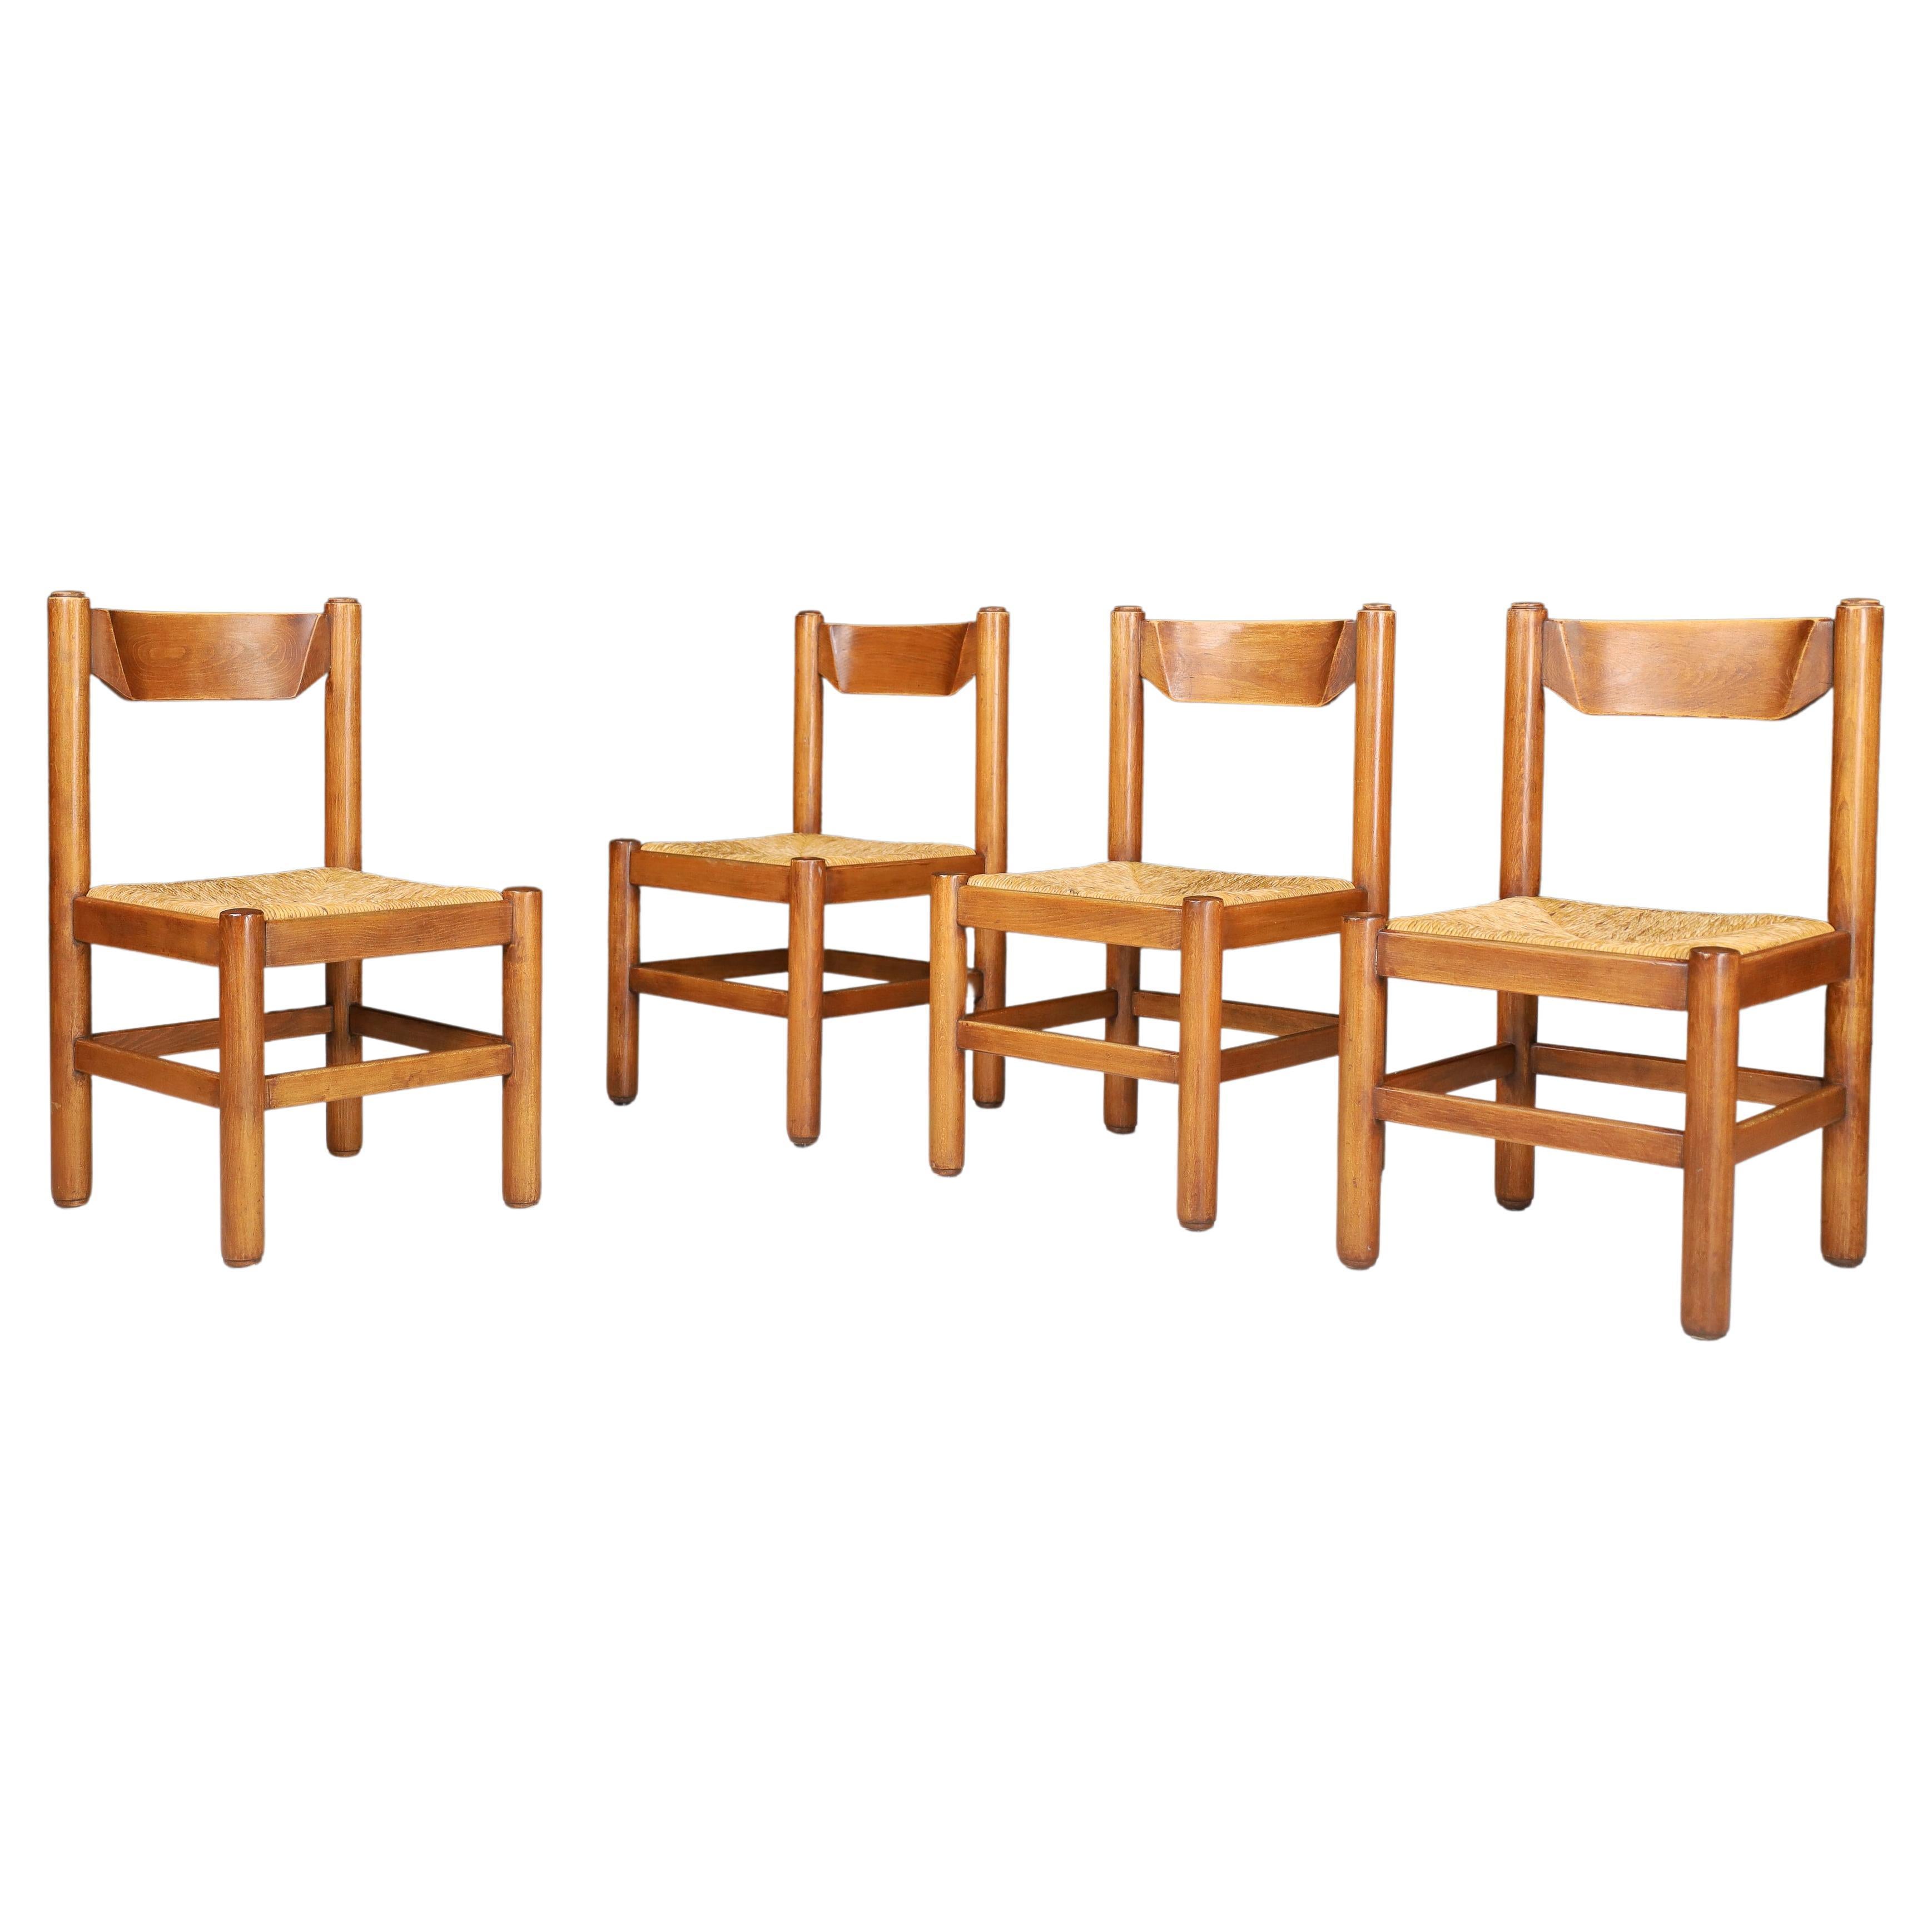 Pair of Four Oak and Rush Chairs in the Style of Charlotte Perriand, France 1960